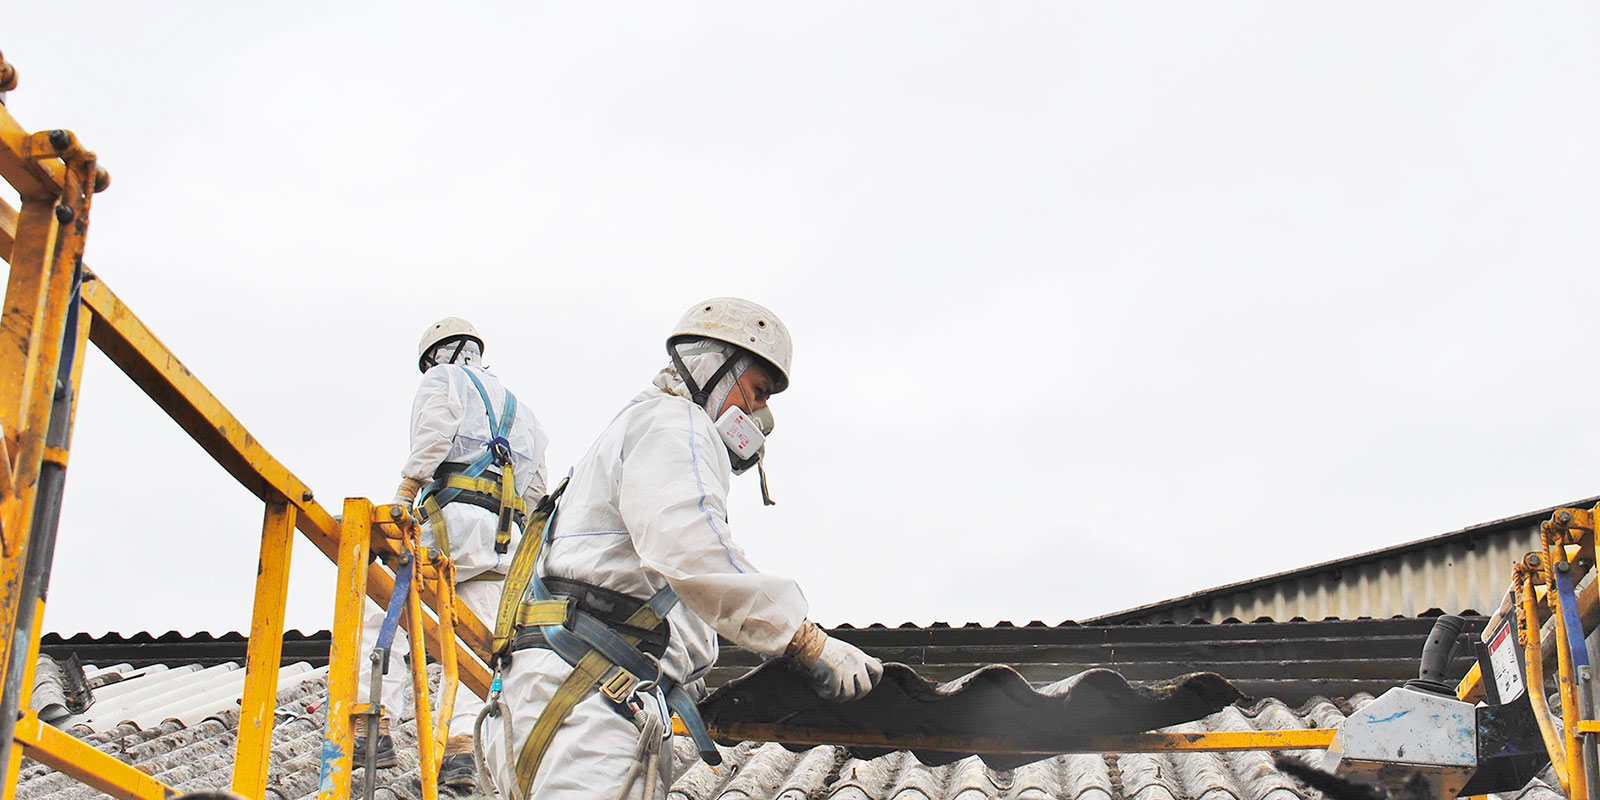 image of 2 workers on roof in white protective gear removing asbestos